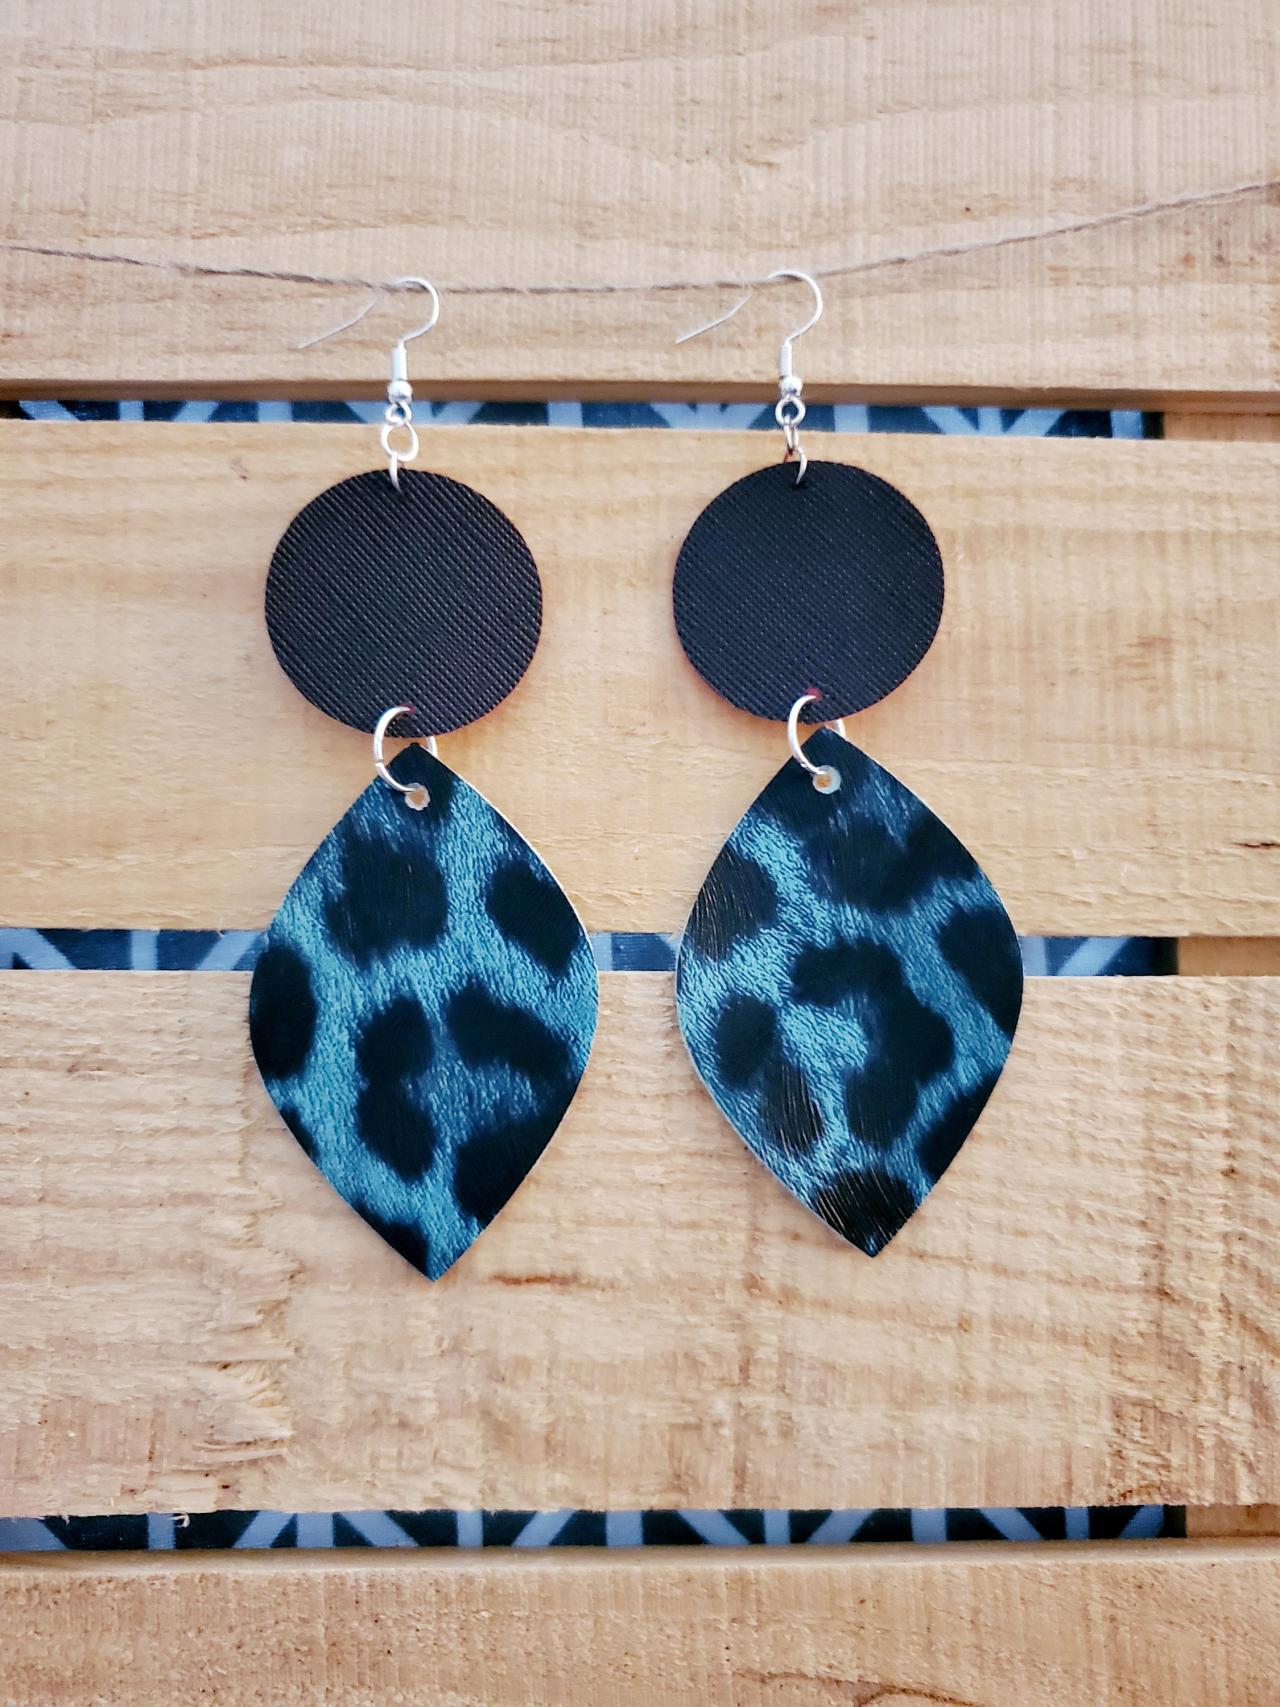 Turquoise Leopard Leather Earrings, Round Leather Earrings, Turquoise Black Jewelry, Round Leaf Jewelry, Boho Chic Rustic Earrings, Cheetah